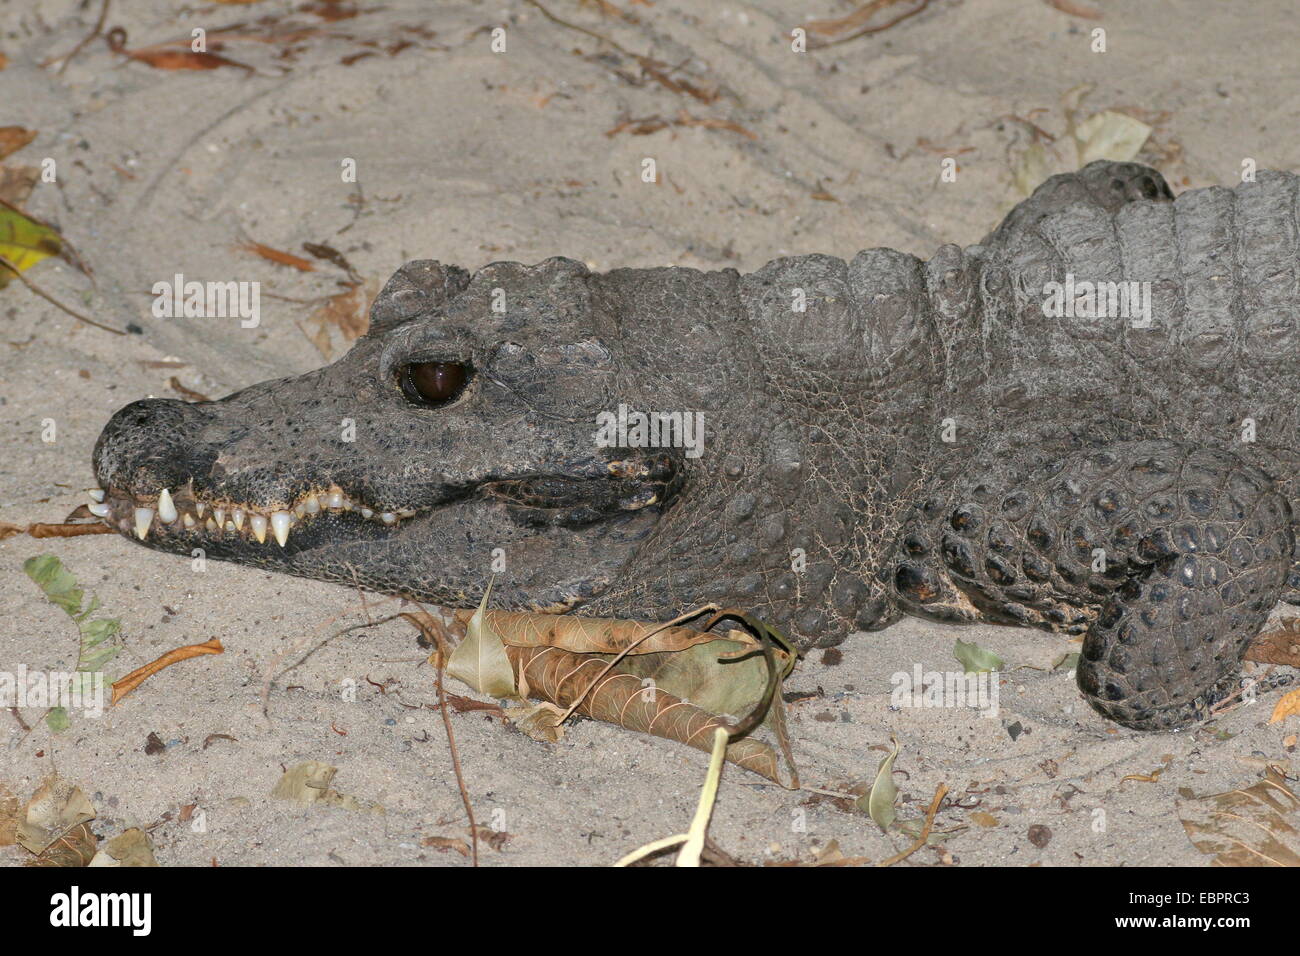 West-African Dwarf Crocodile (Osteolaemus tetraspis), a.k.a. Broad-snouted or Bony crocodile, close-up of the head Stock Photo